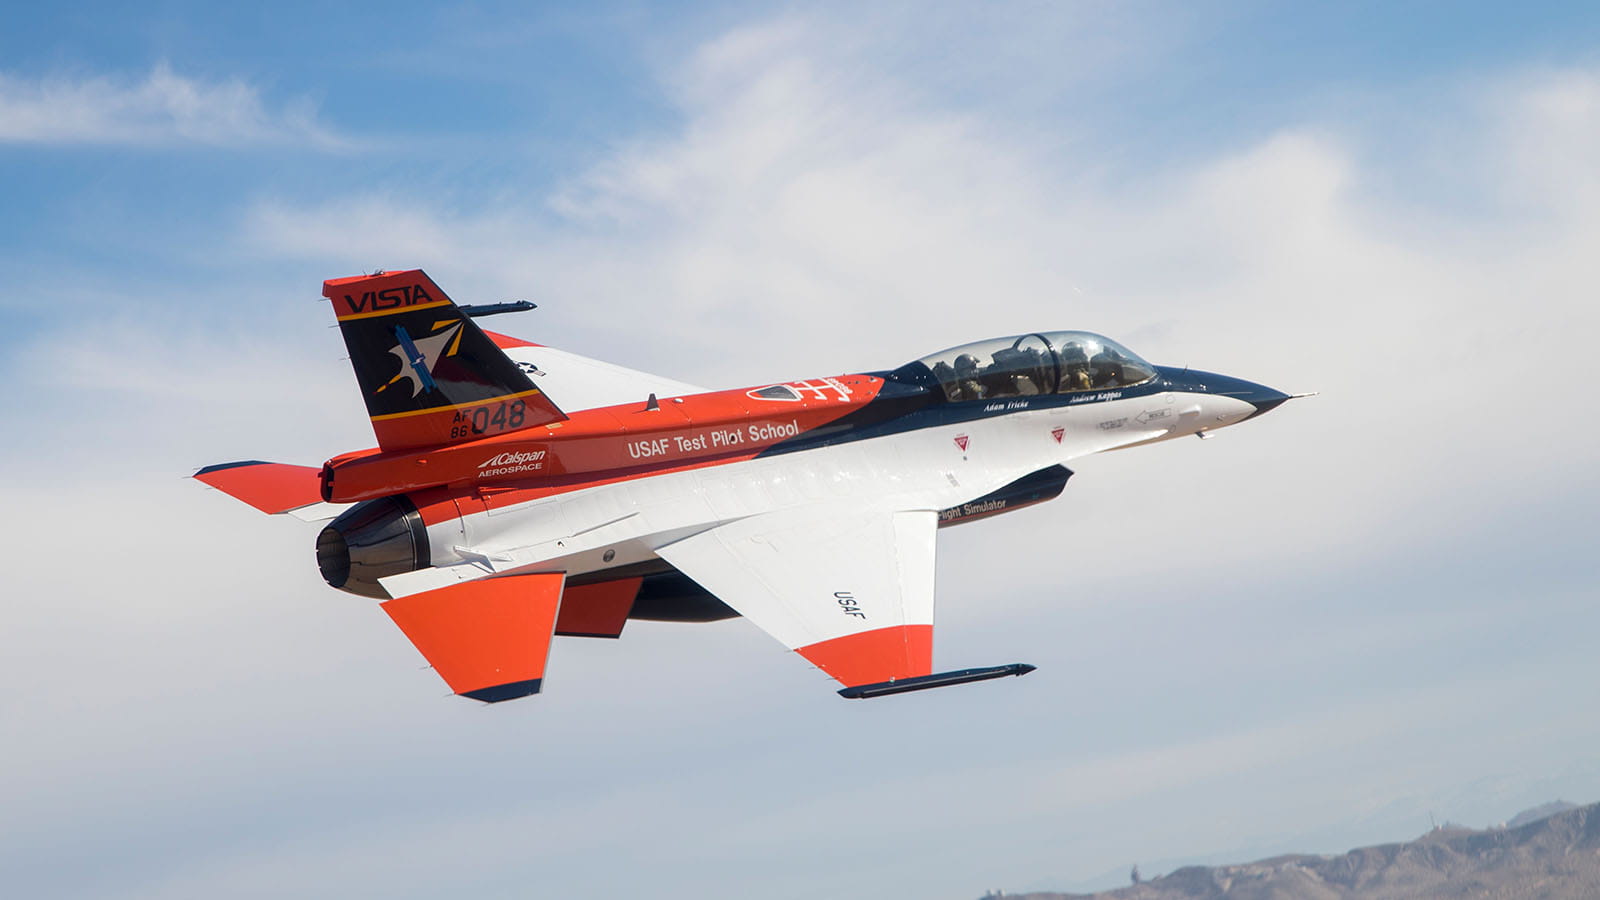 A U.S. Air Force Test Pilot School test aircraft, simliar to an F-16 fighter jet but painted orange, white and blue, flies against a backdrop of blue sky and white clouds.